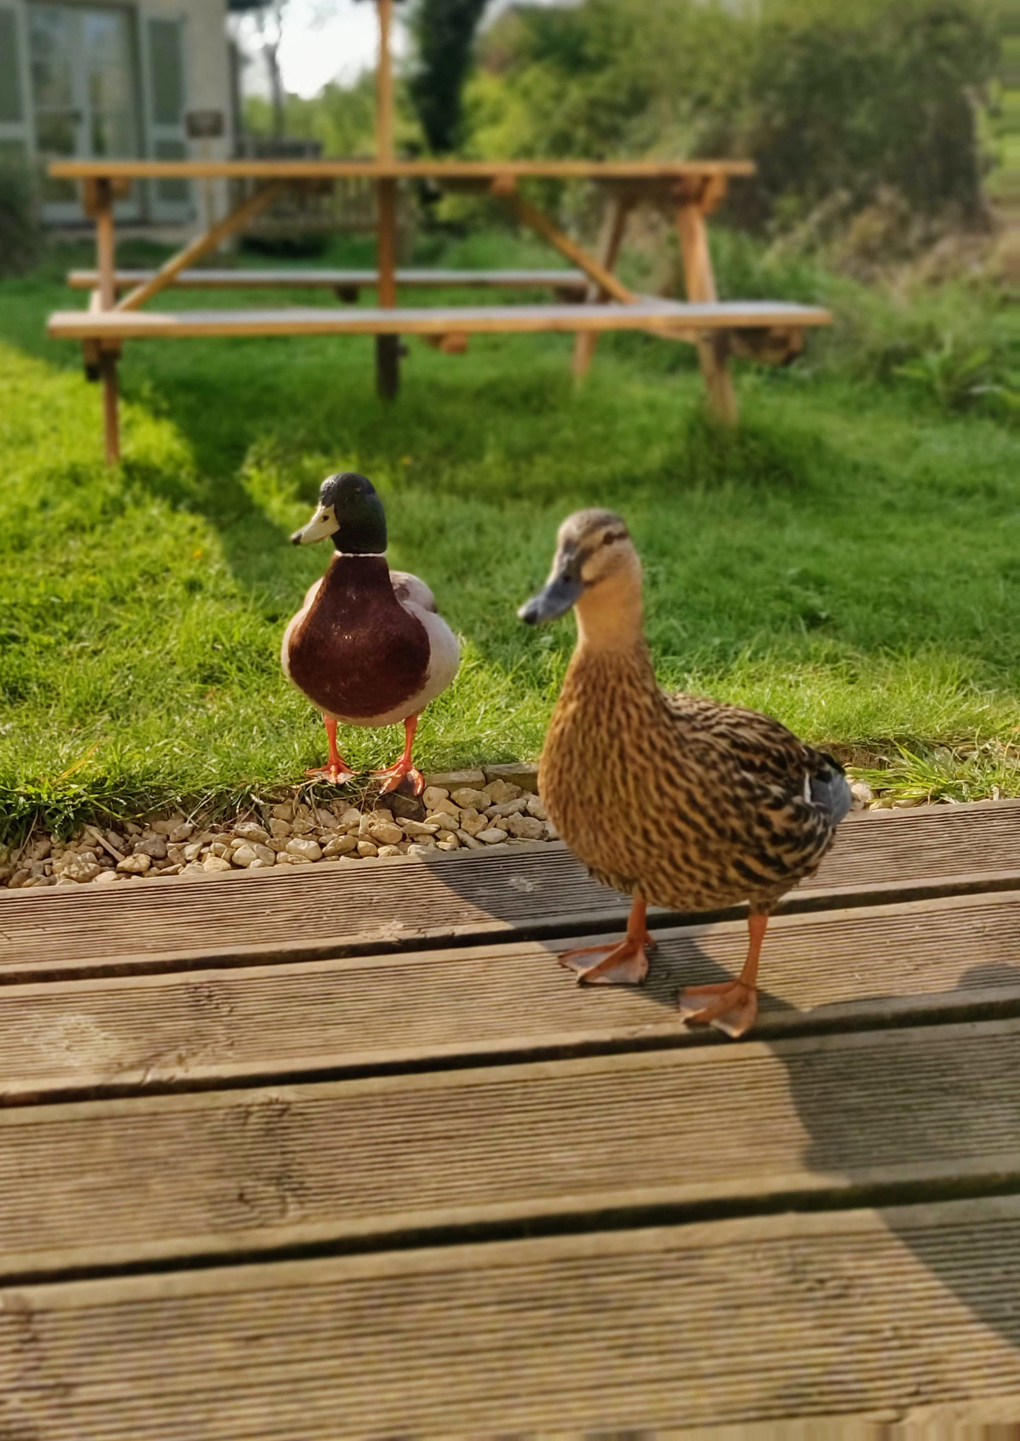 Two ducks on a decking in the sun, waiting for food.